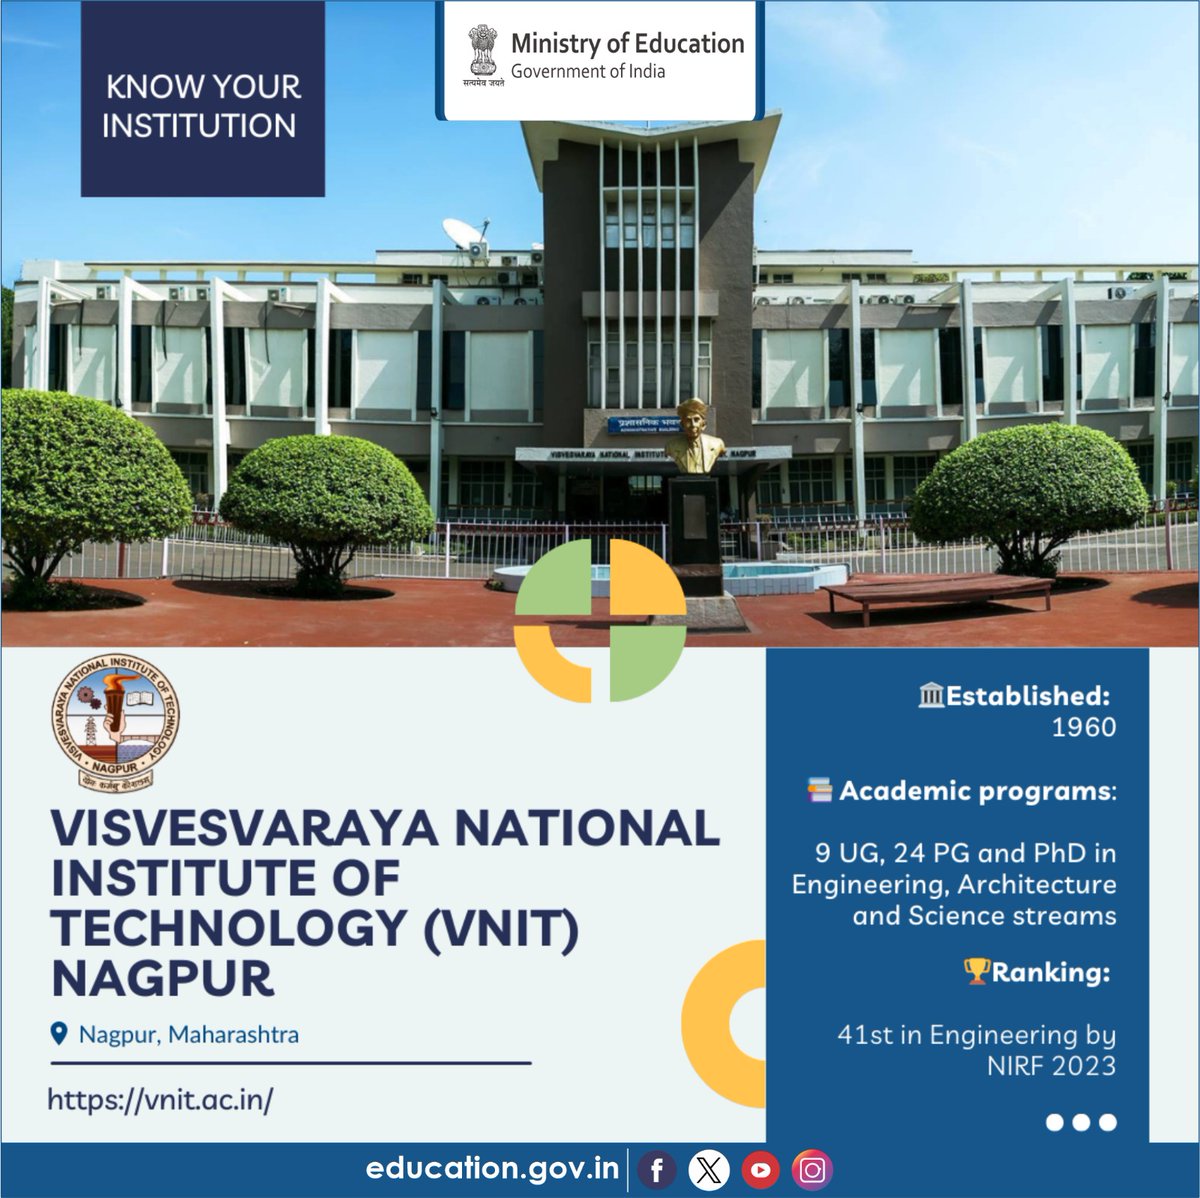 Know about the HEIs of India! Visvesvaraya National Institute of Technology (VNIT) Nagpur, originally established as Visvesvaraya Regional College of Engineering (VRCE) in 1960, was granted Deemed-to-be University status by the Government of India in 2002 and declared an